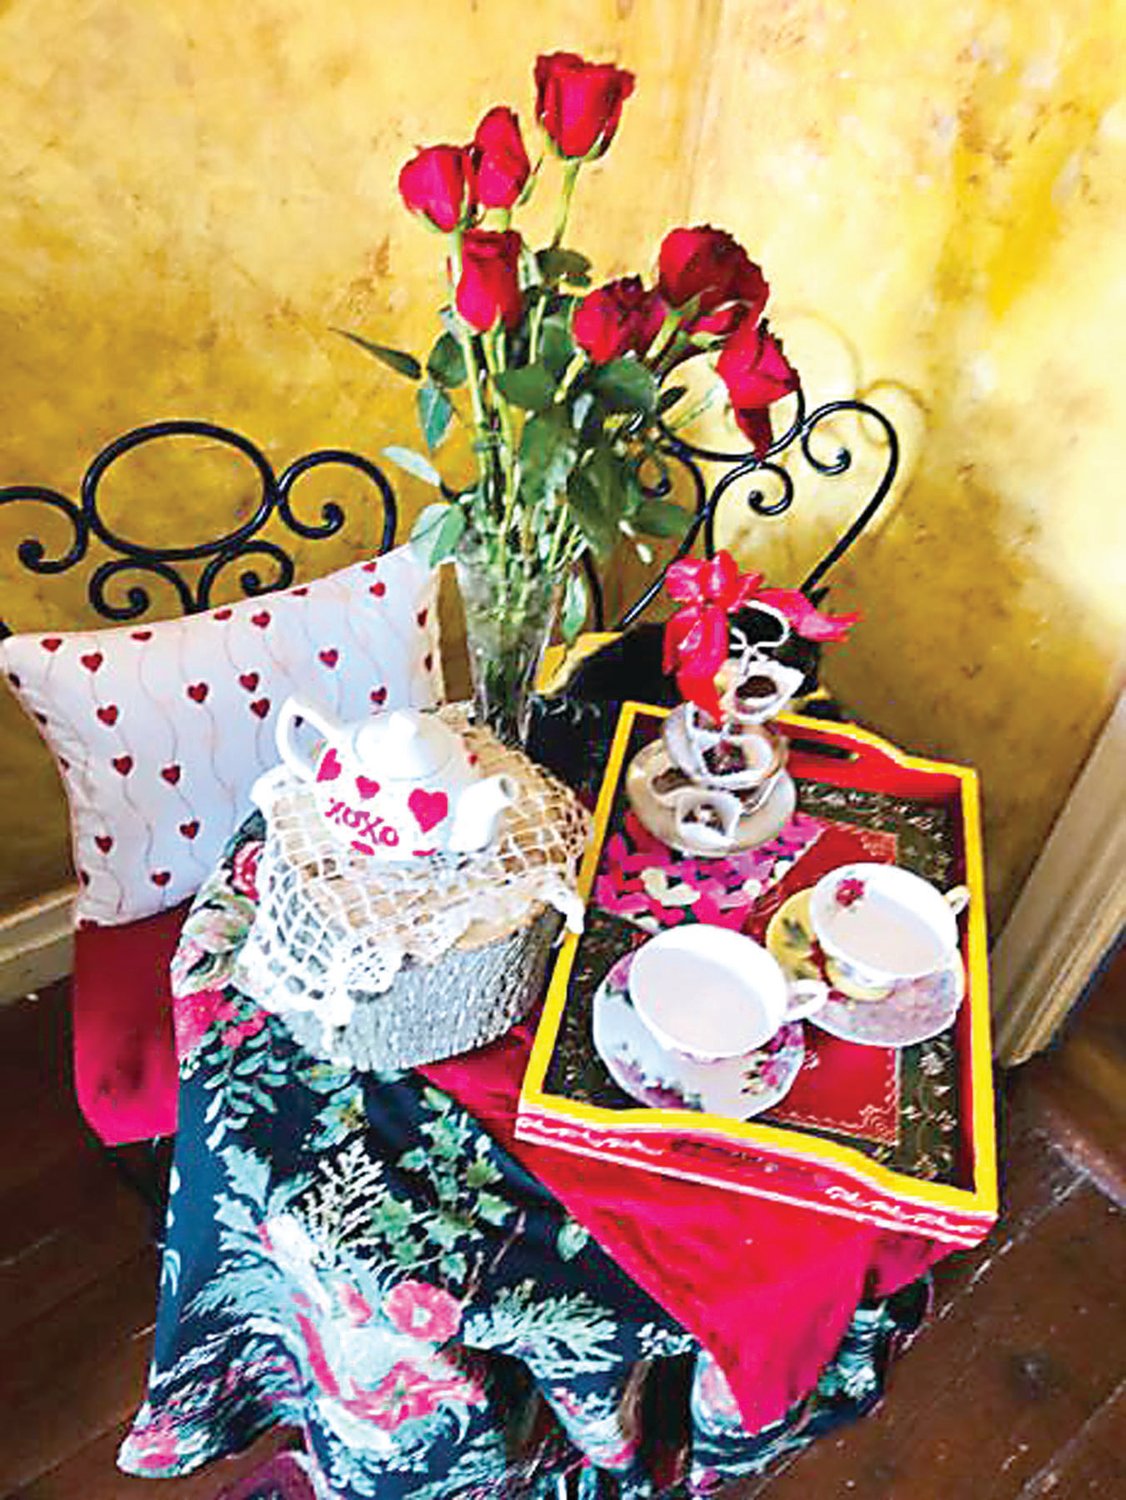 A Sweetheart Tea for Two Tray created by Macungie Mountain Herb Farm, a Wrightstown Farmers Market vendor.